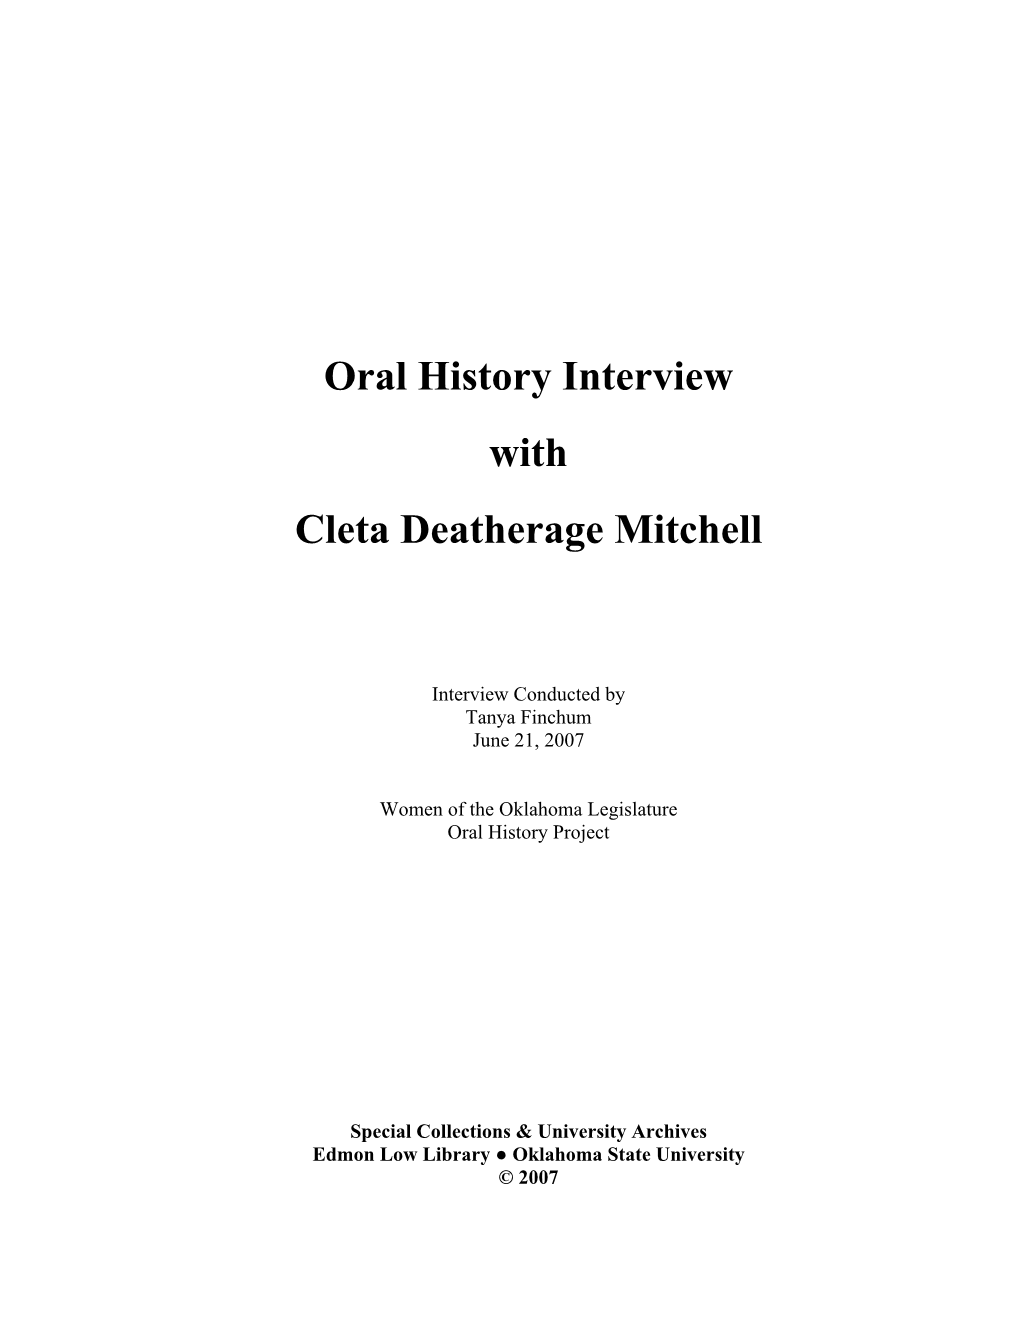 Oral History Interview with Cleta Deatherage Mitchell